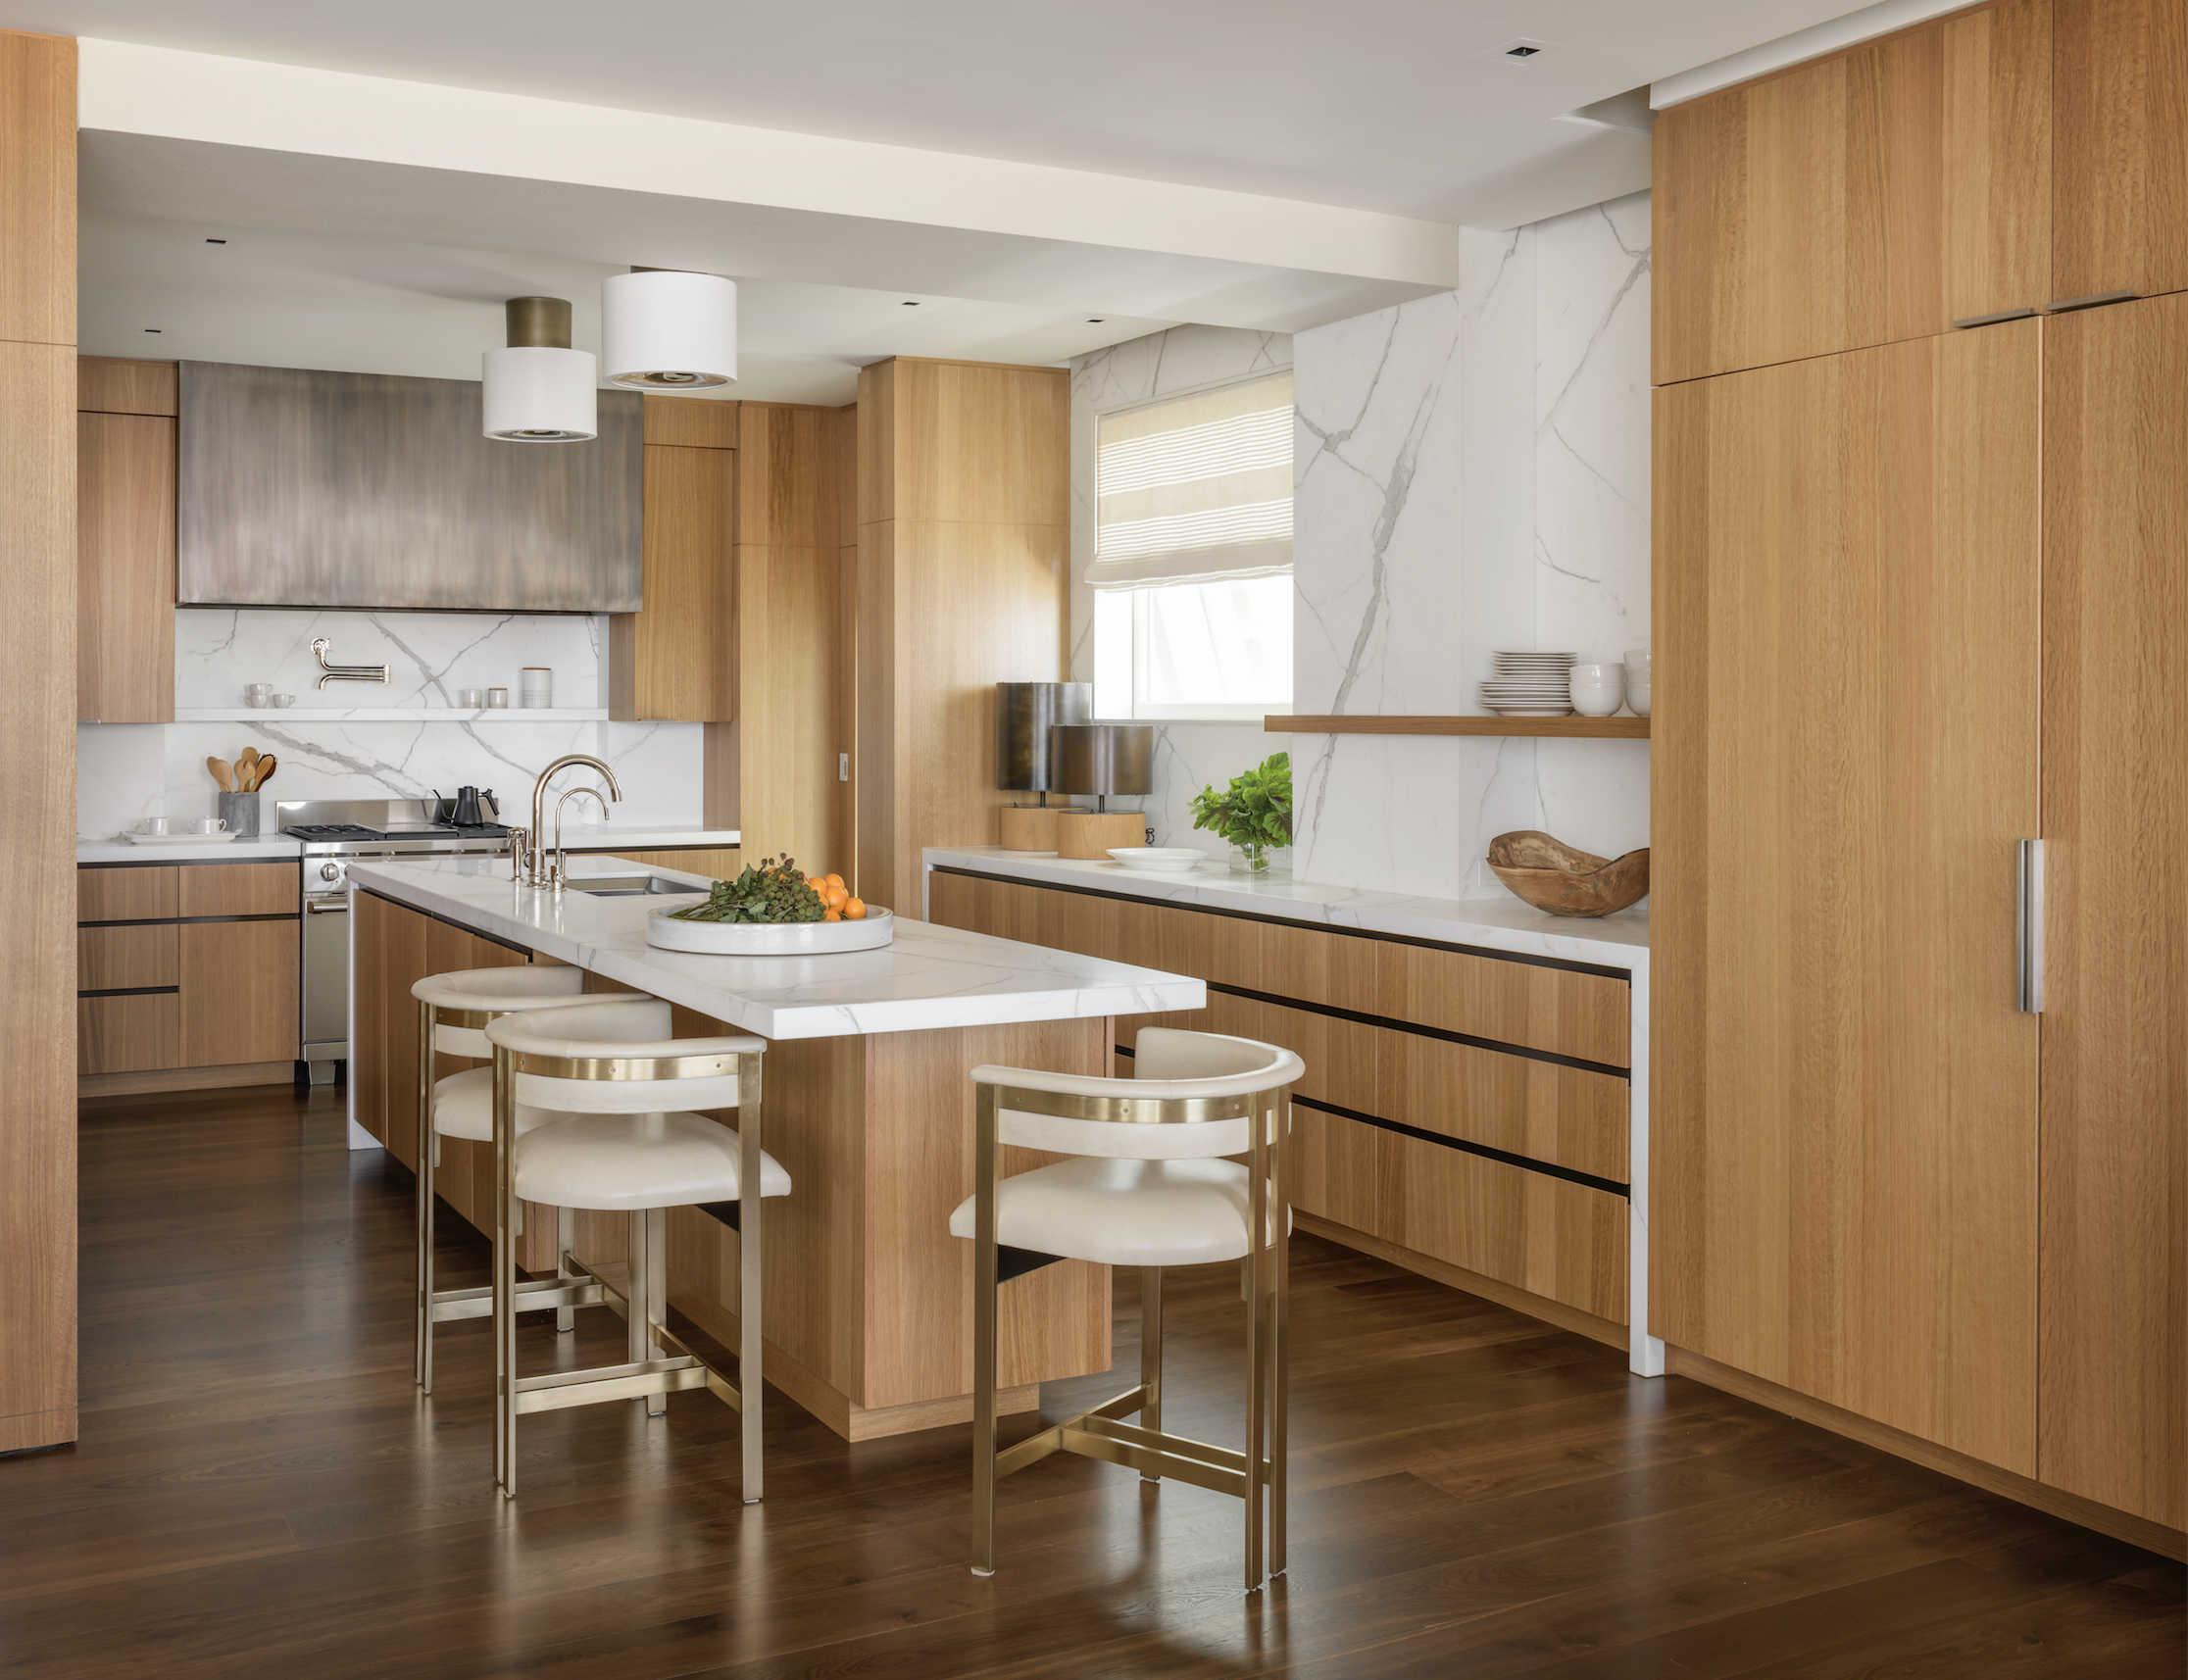 Kitchen decor trends for 2020